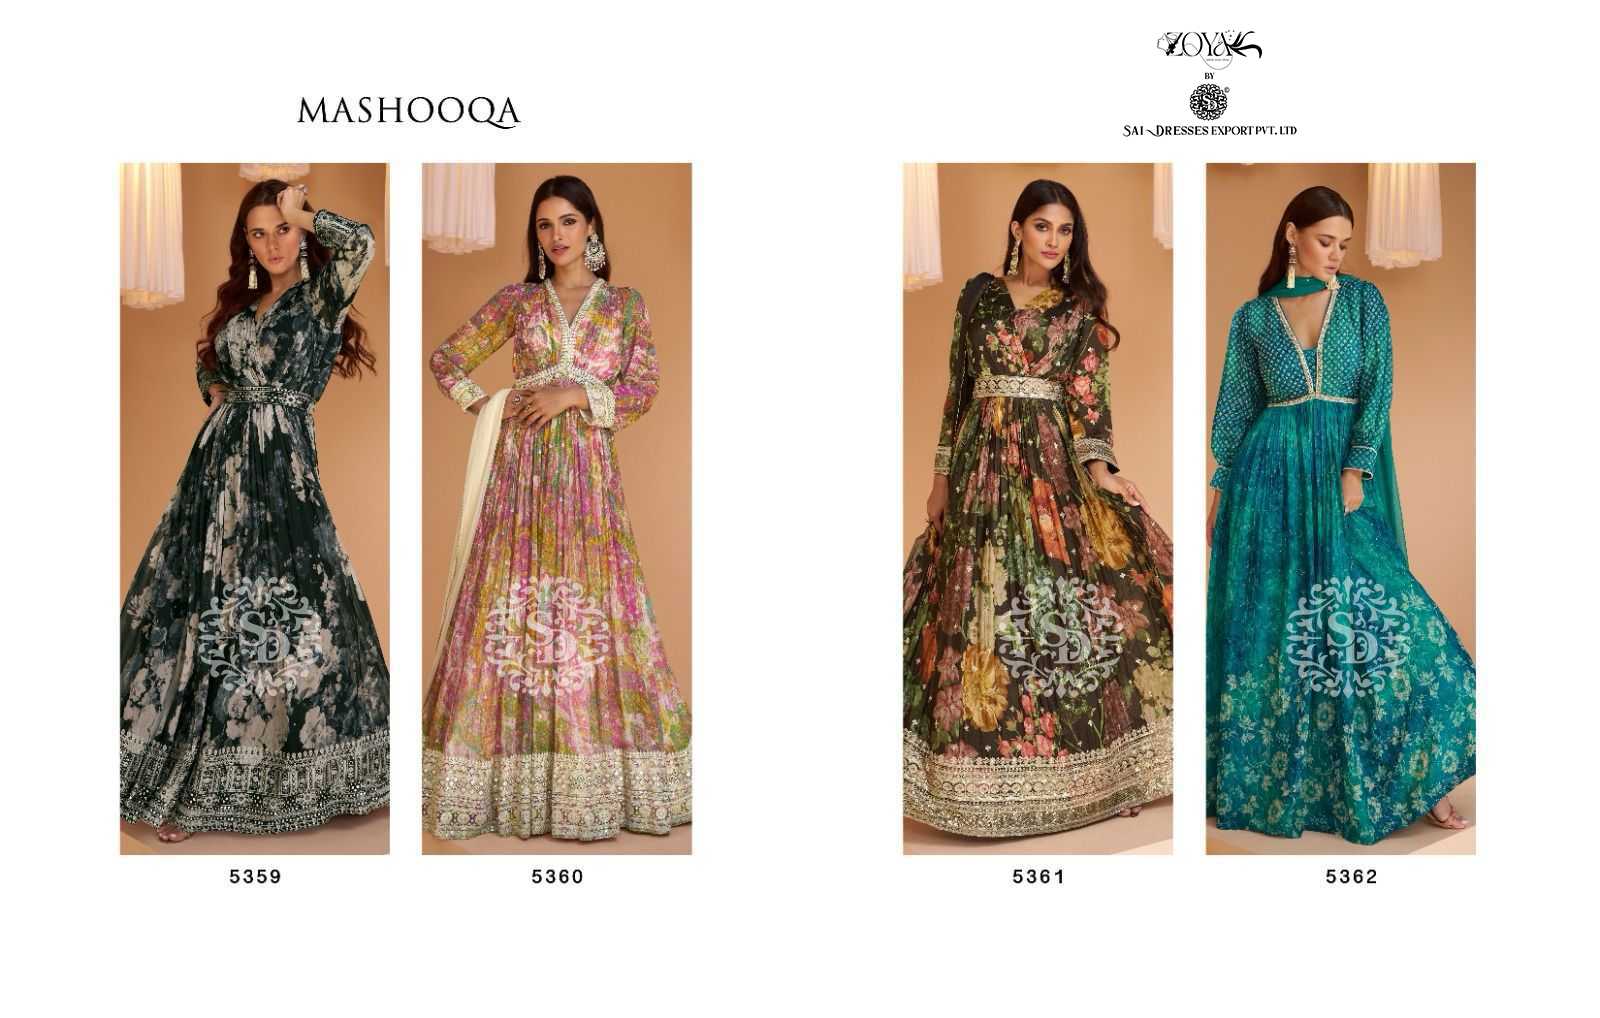 SAI DRESSES PRESENT MASHOOQA READYMADE CLASSY PARTY WEAR DESIGNER LONG GOWN WITH DUPATTA IN WHOLESALE RATE IN SURAT